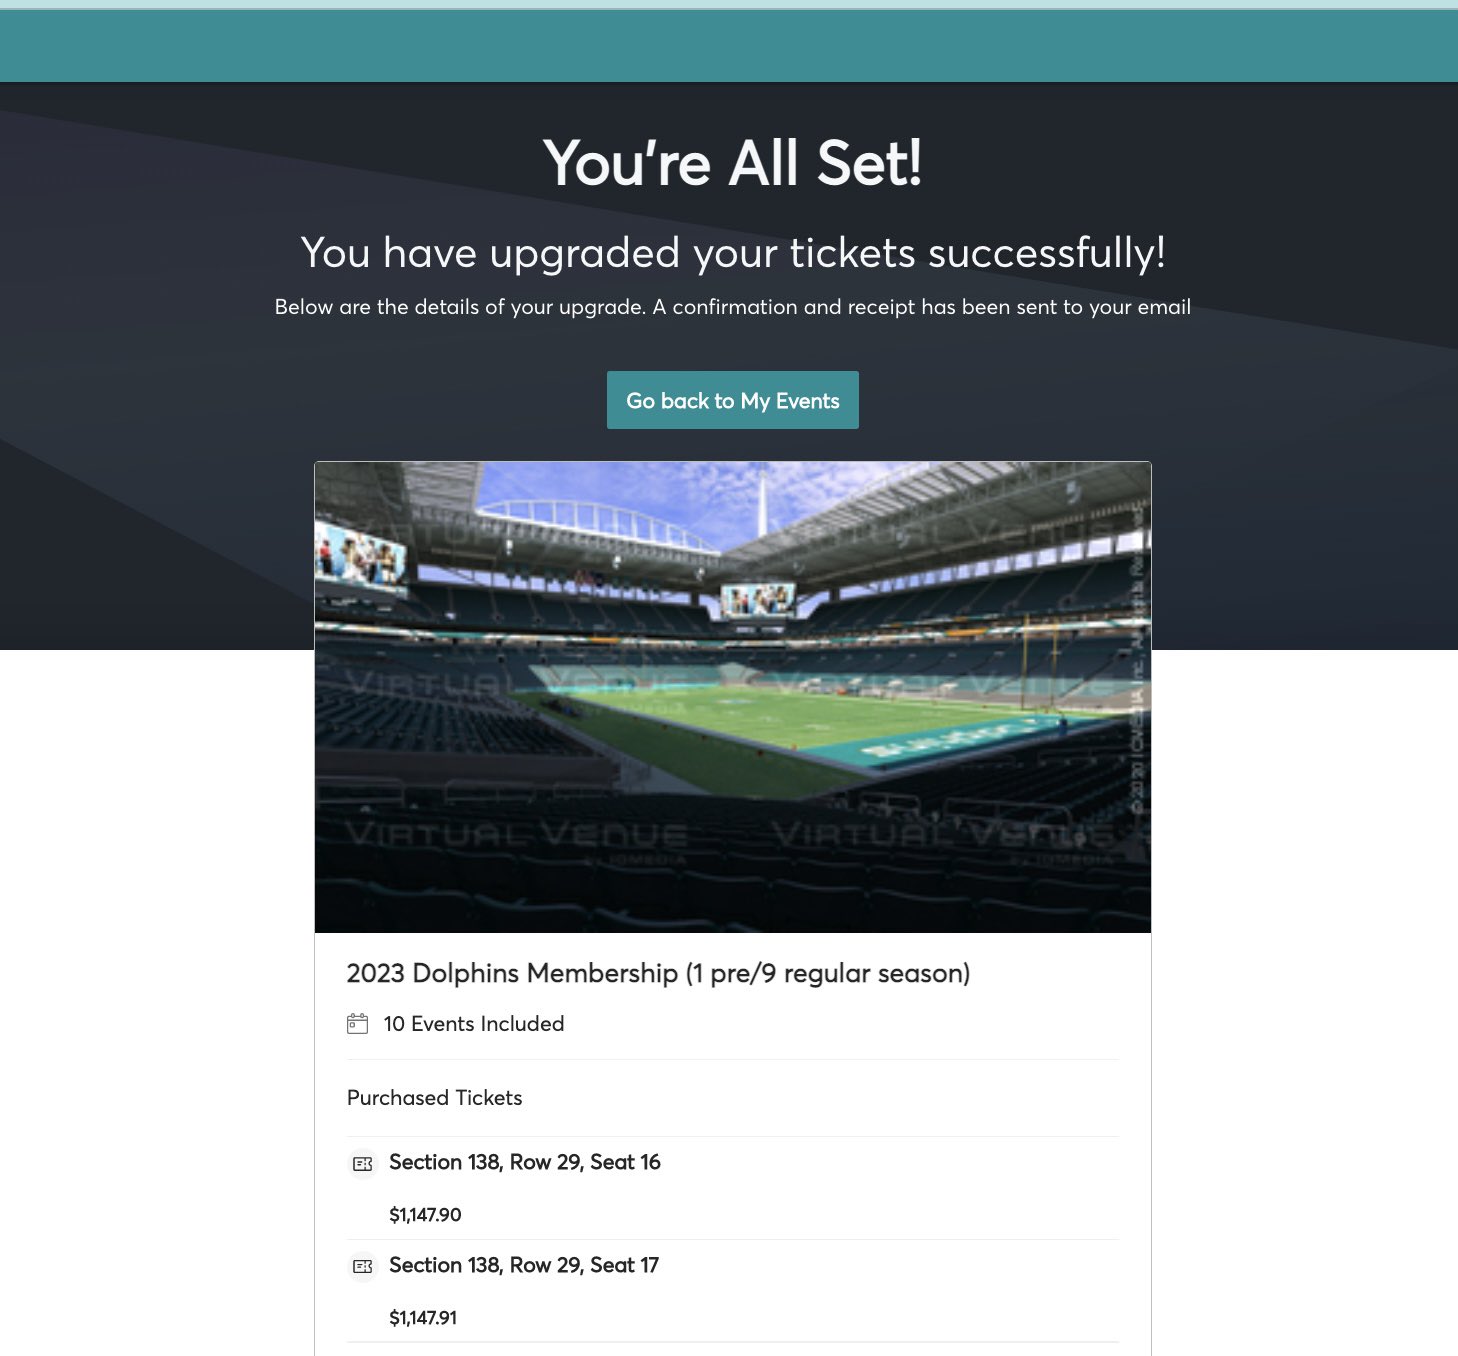 Nando Talk on X: 'Dolphins Season Tickets UPGRADED! From 349 to